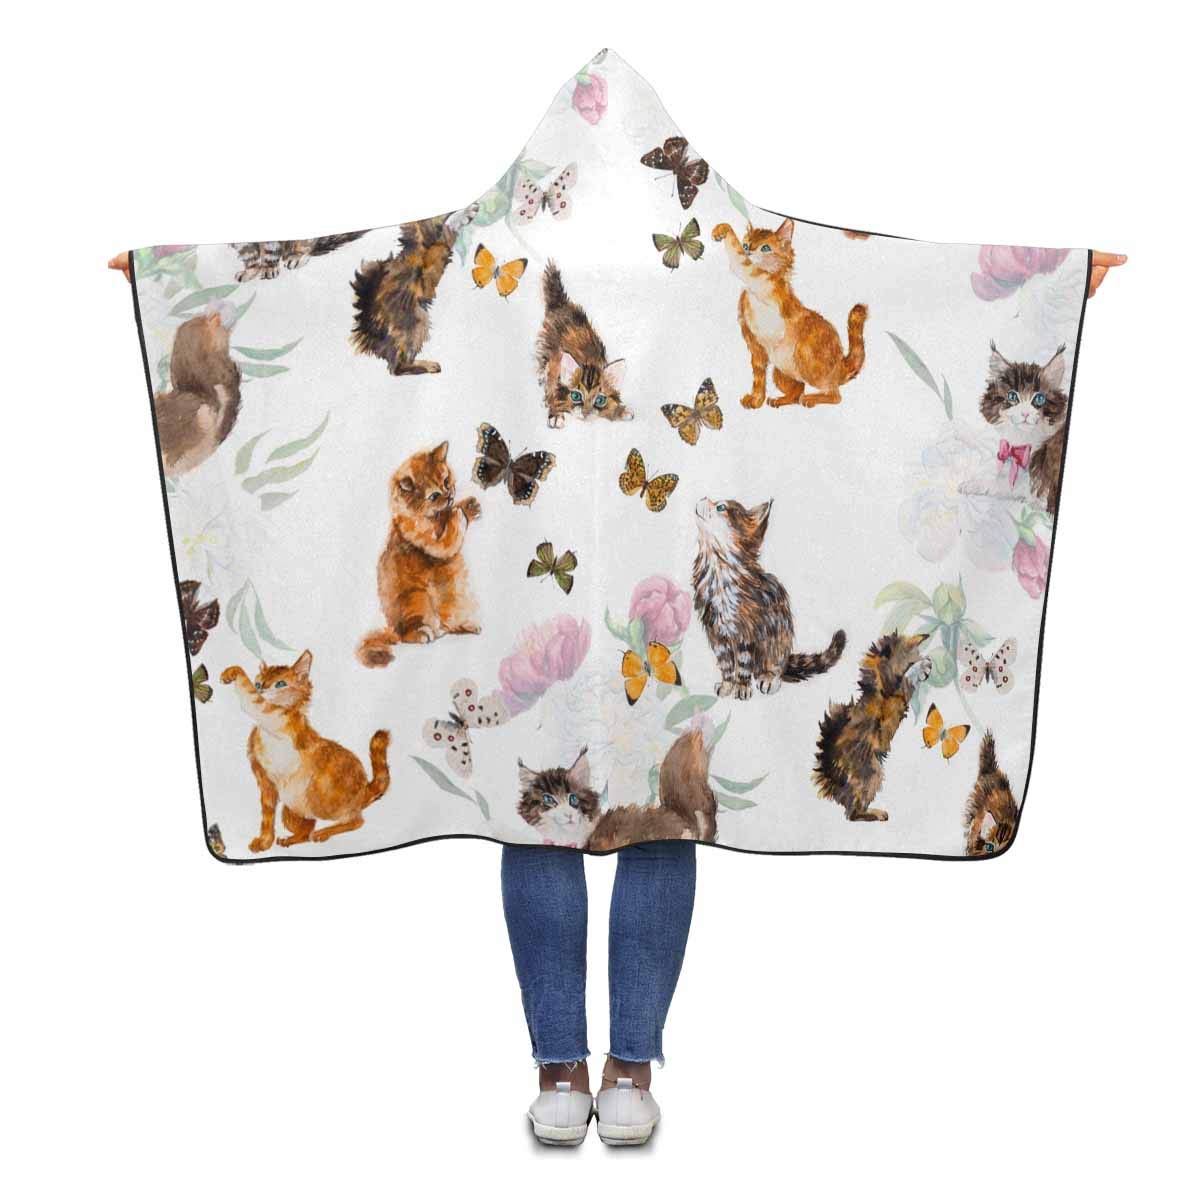 INTERESTPRINT Cute Colorful Dog Throw Blanket 60 x 50 inches Soft Warm Micro Fleece Blankets with Hood 